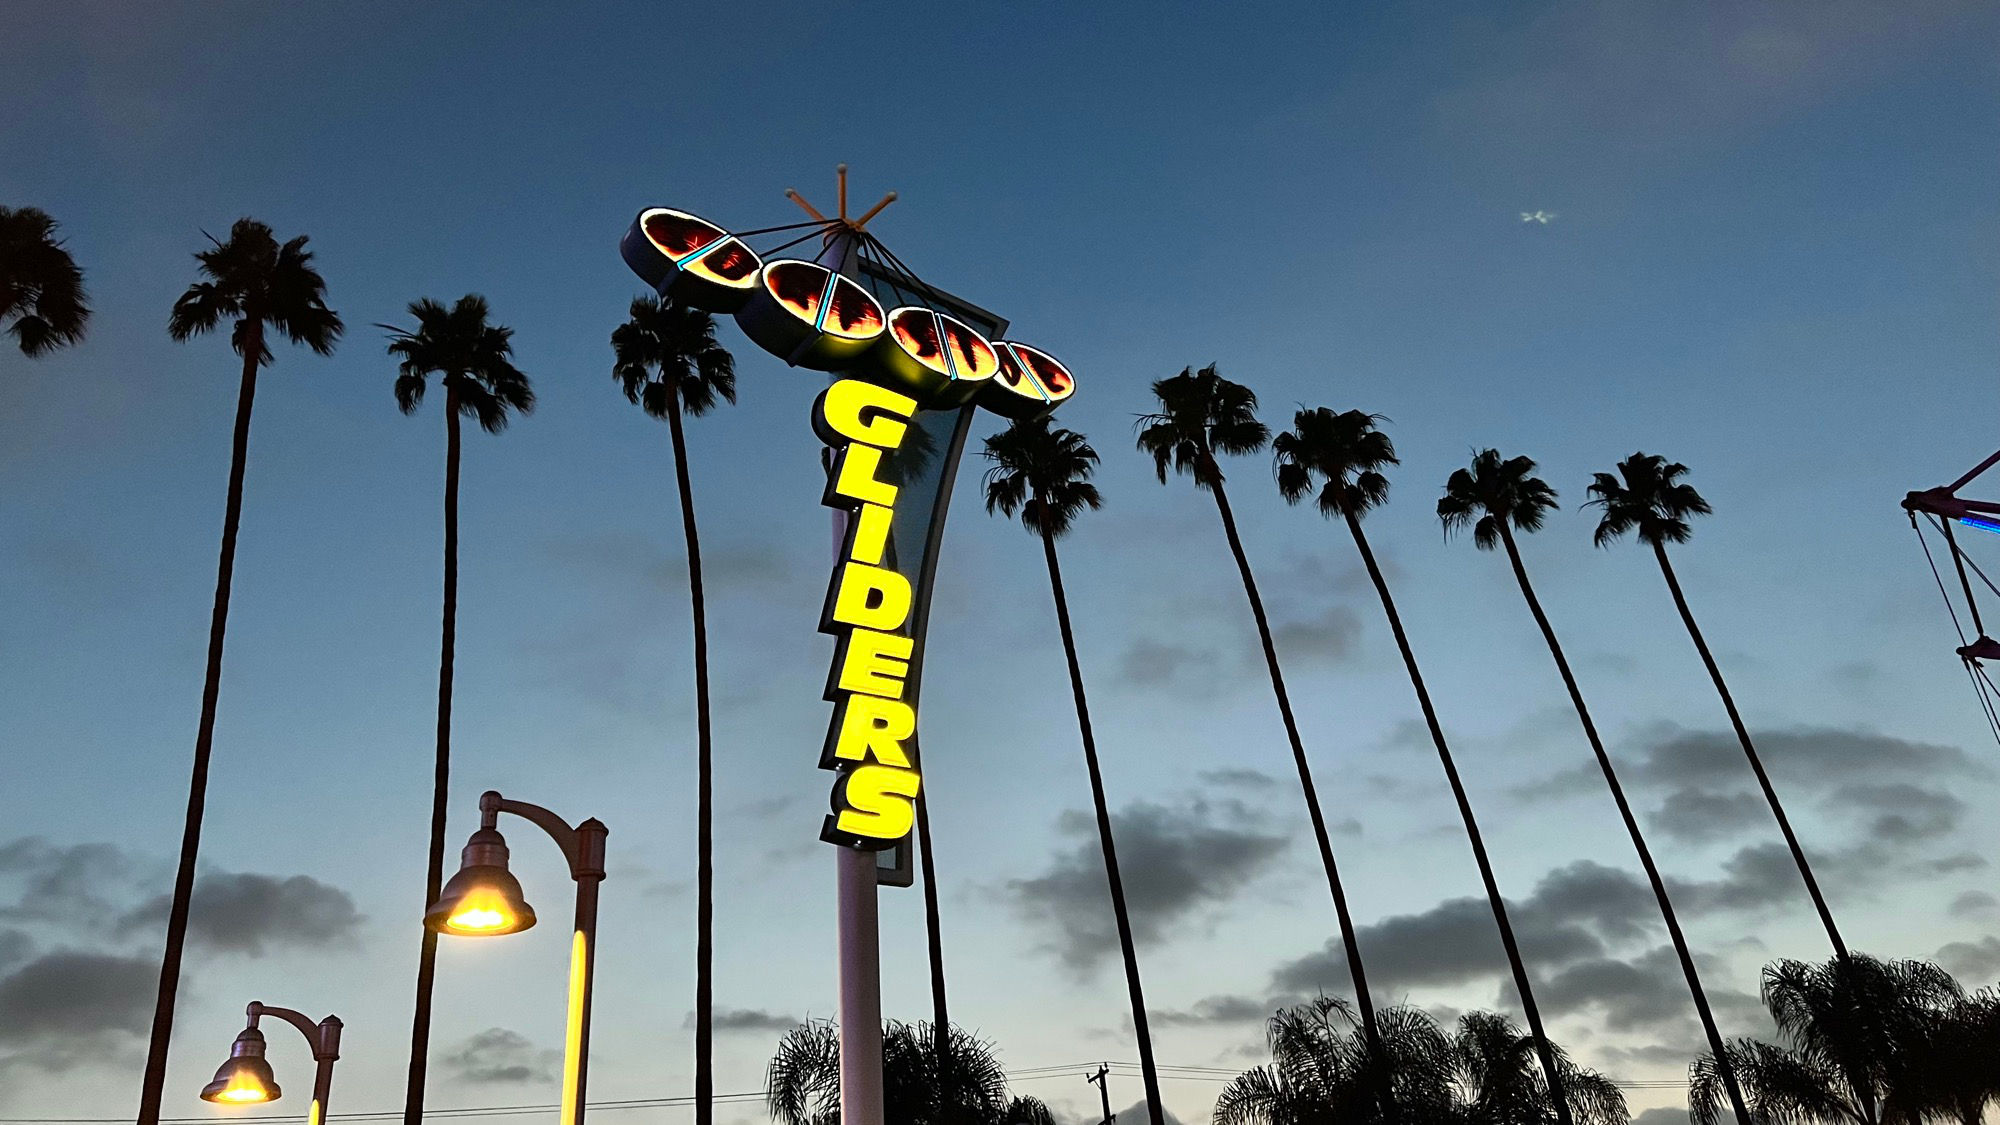 Surfside Gliders Sign at Night